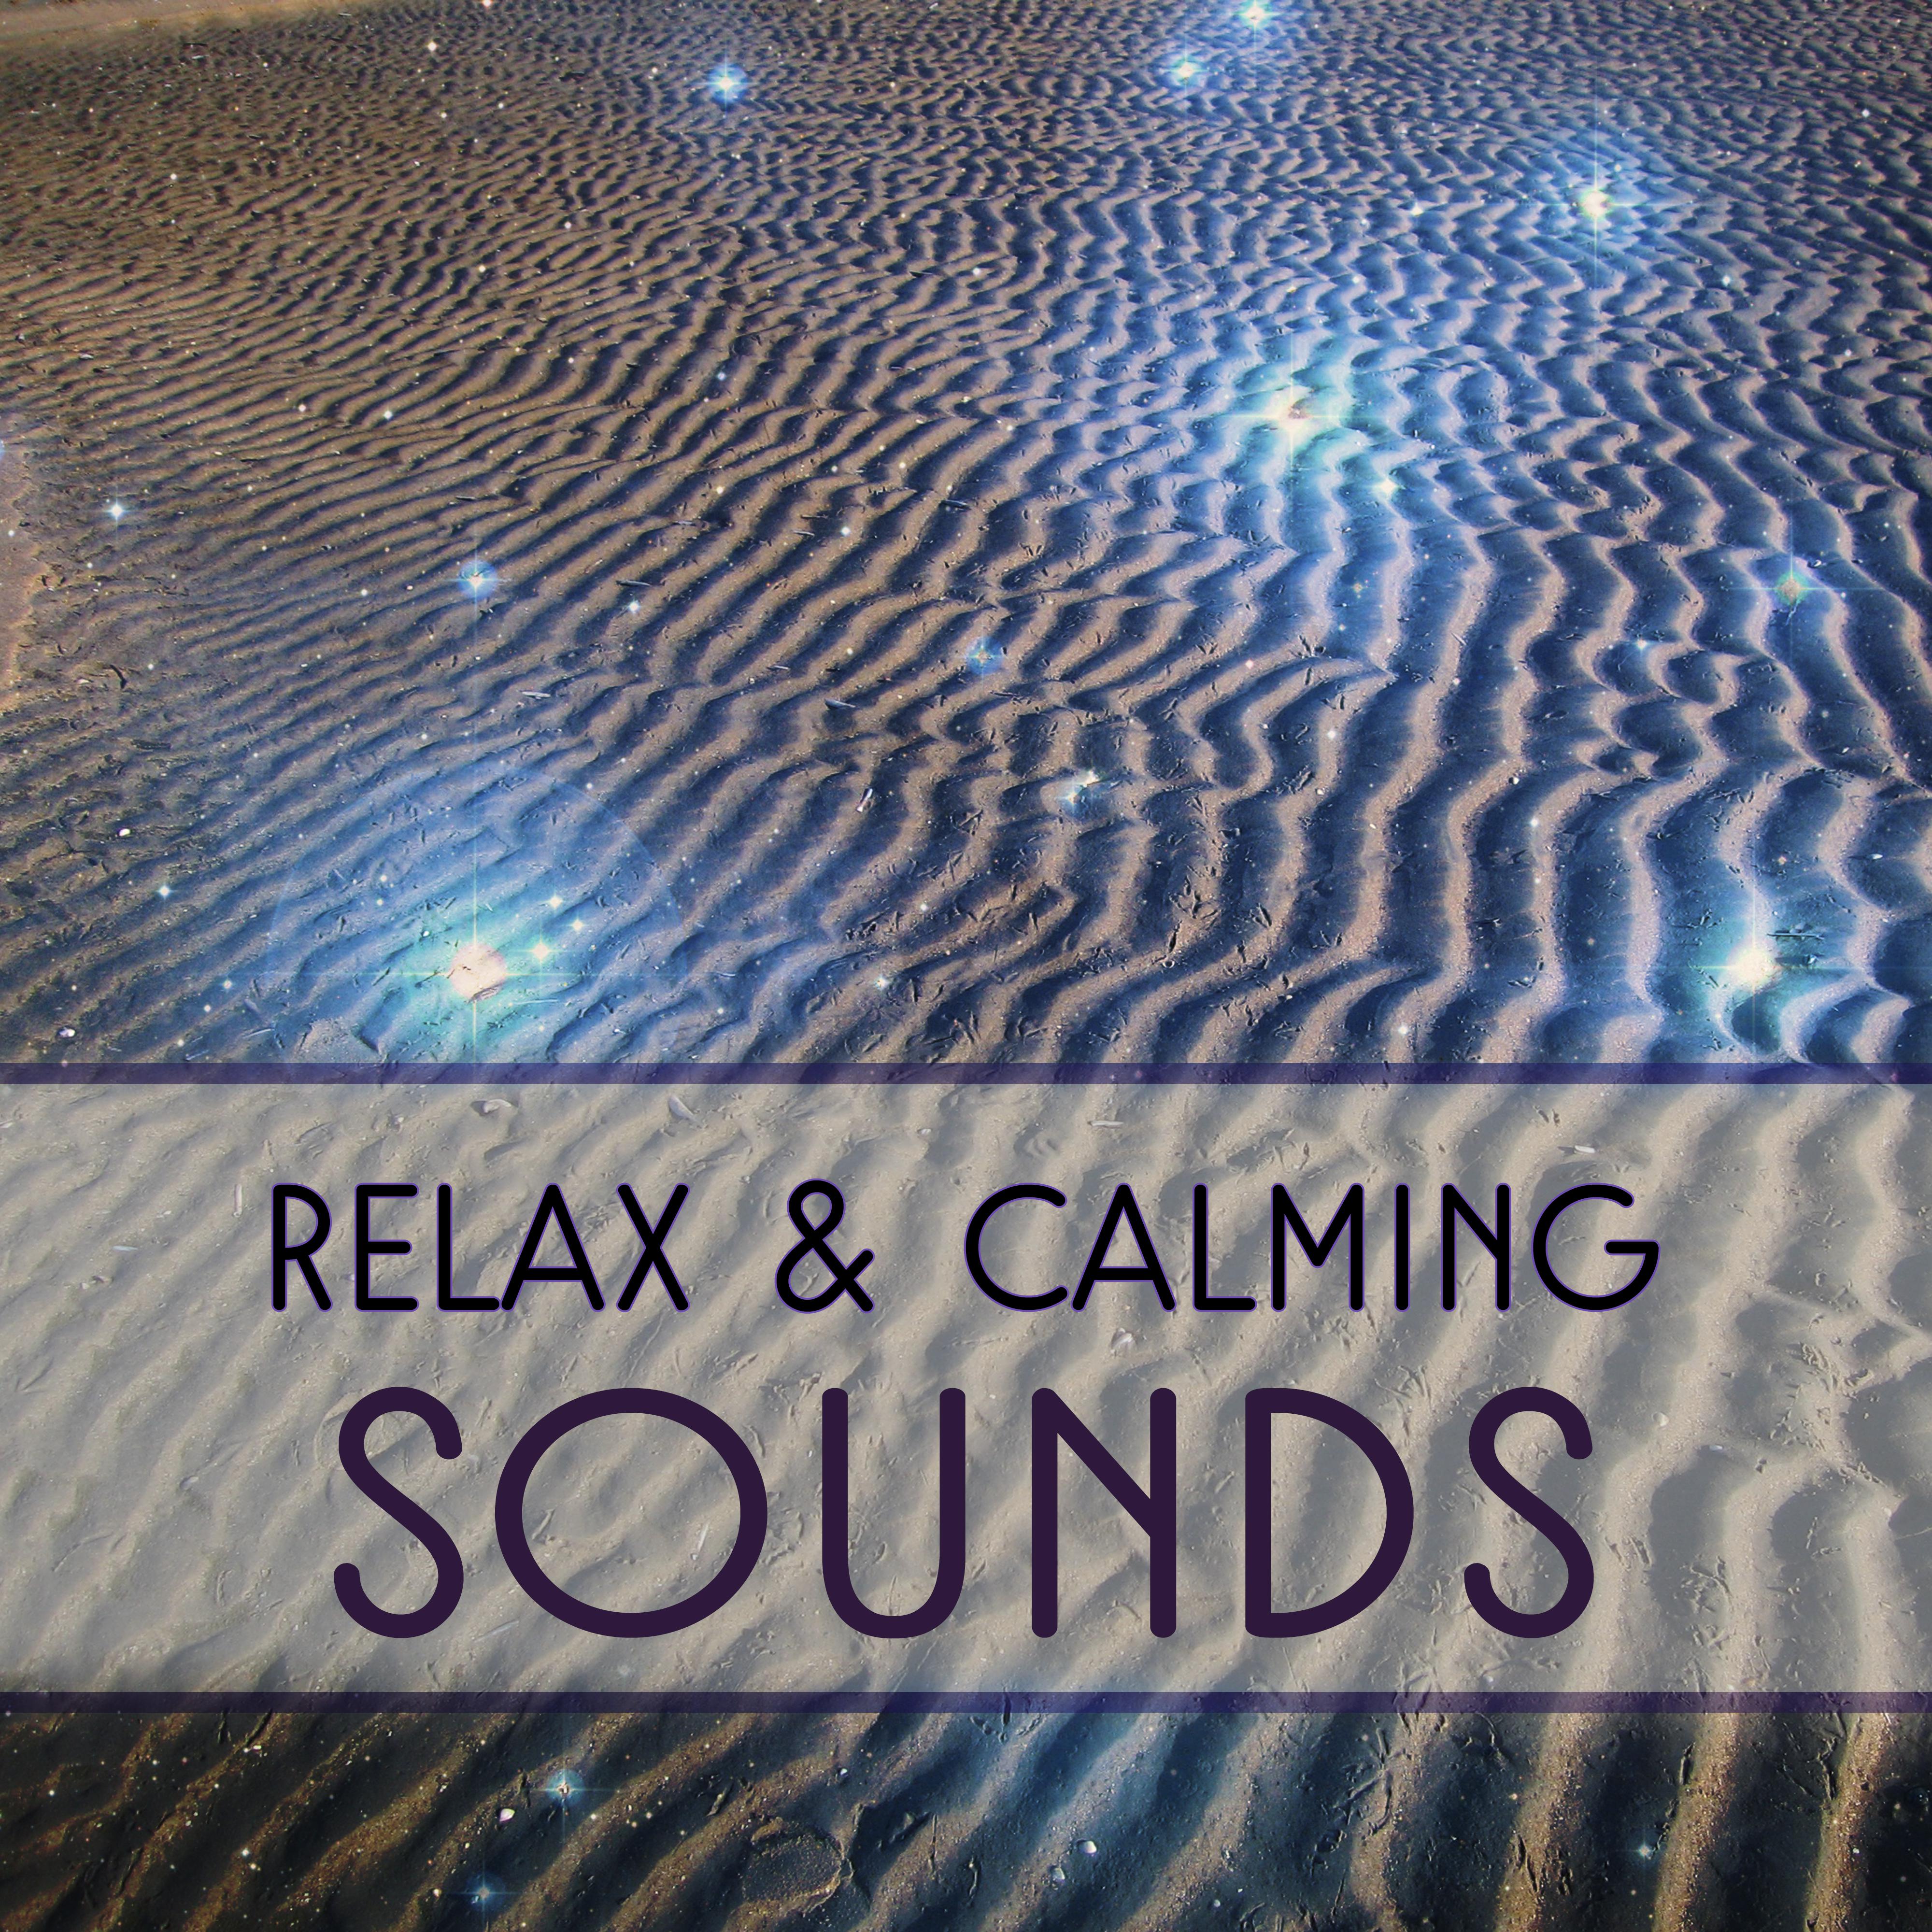 Relax & Calming Sounds – Music for Relaxation, Deep Sleep, Stress Relief, Ambient Music, Nature Sounds to Rest, Calmness, Pure Mind